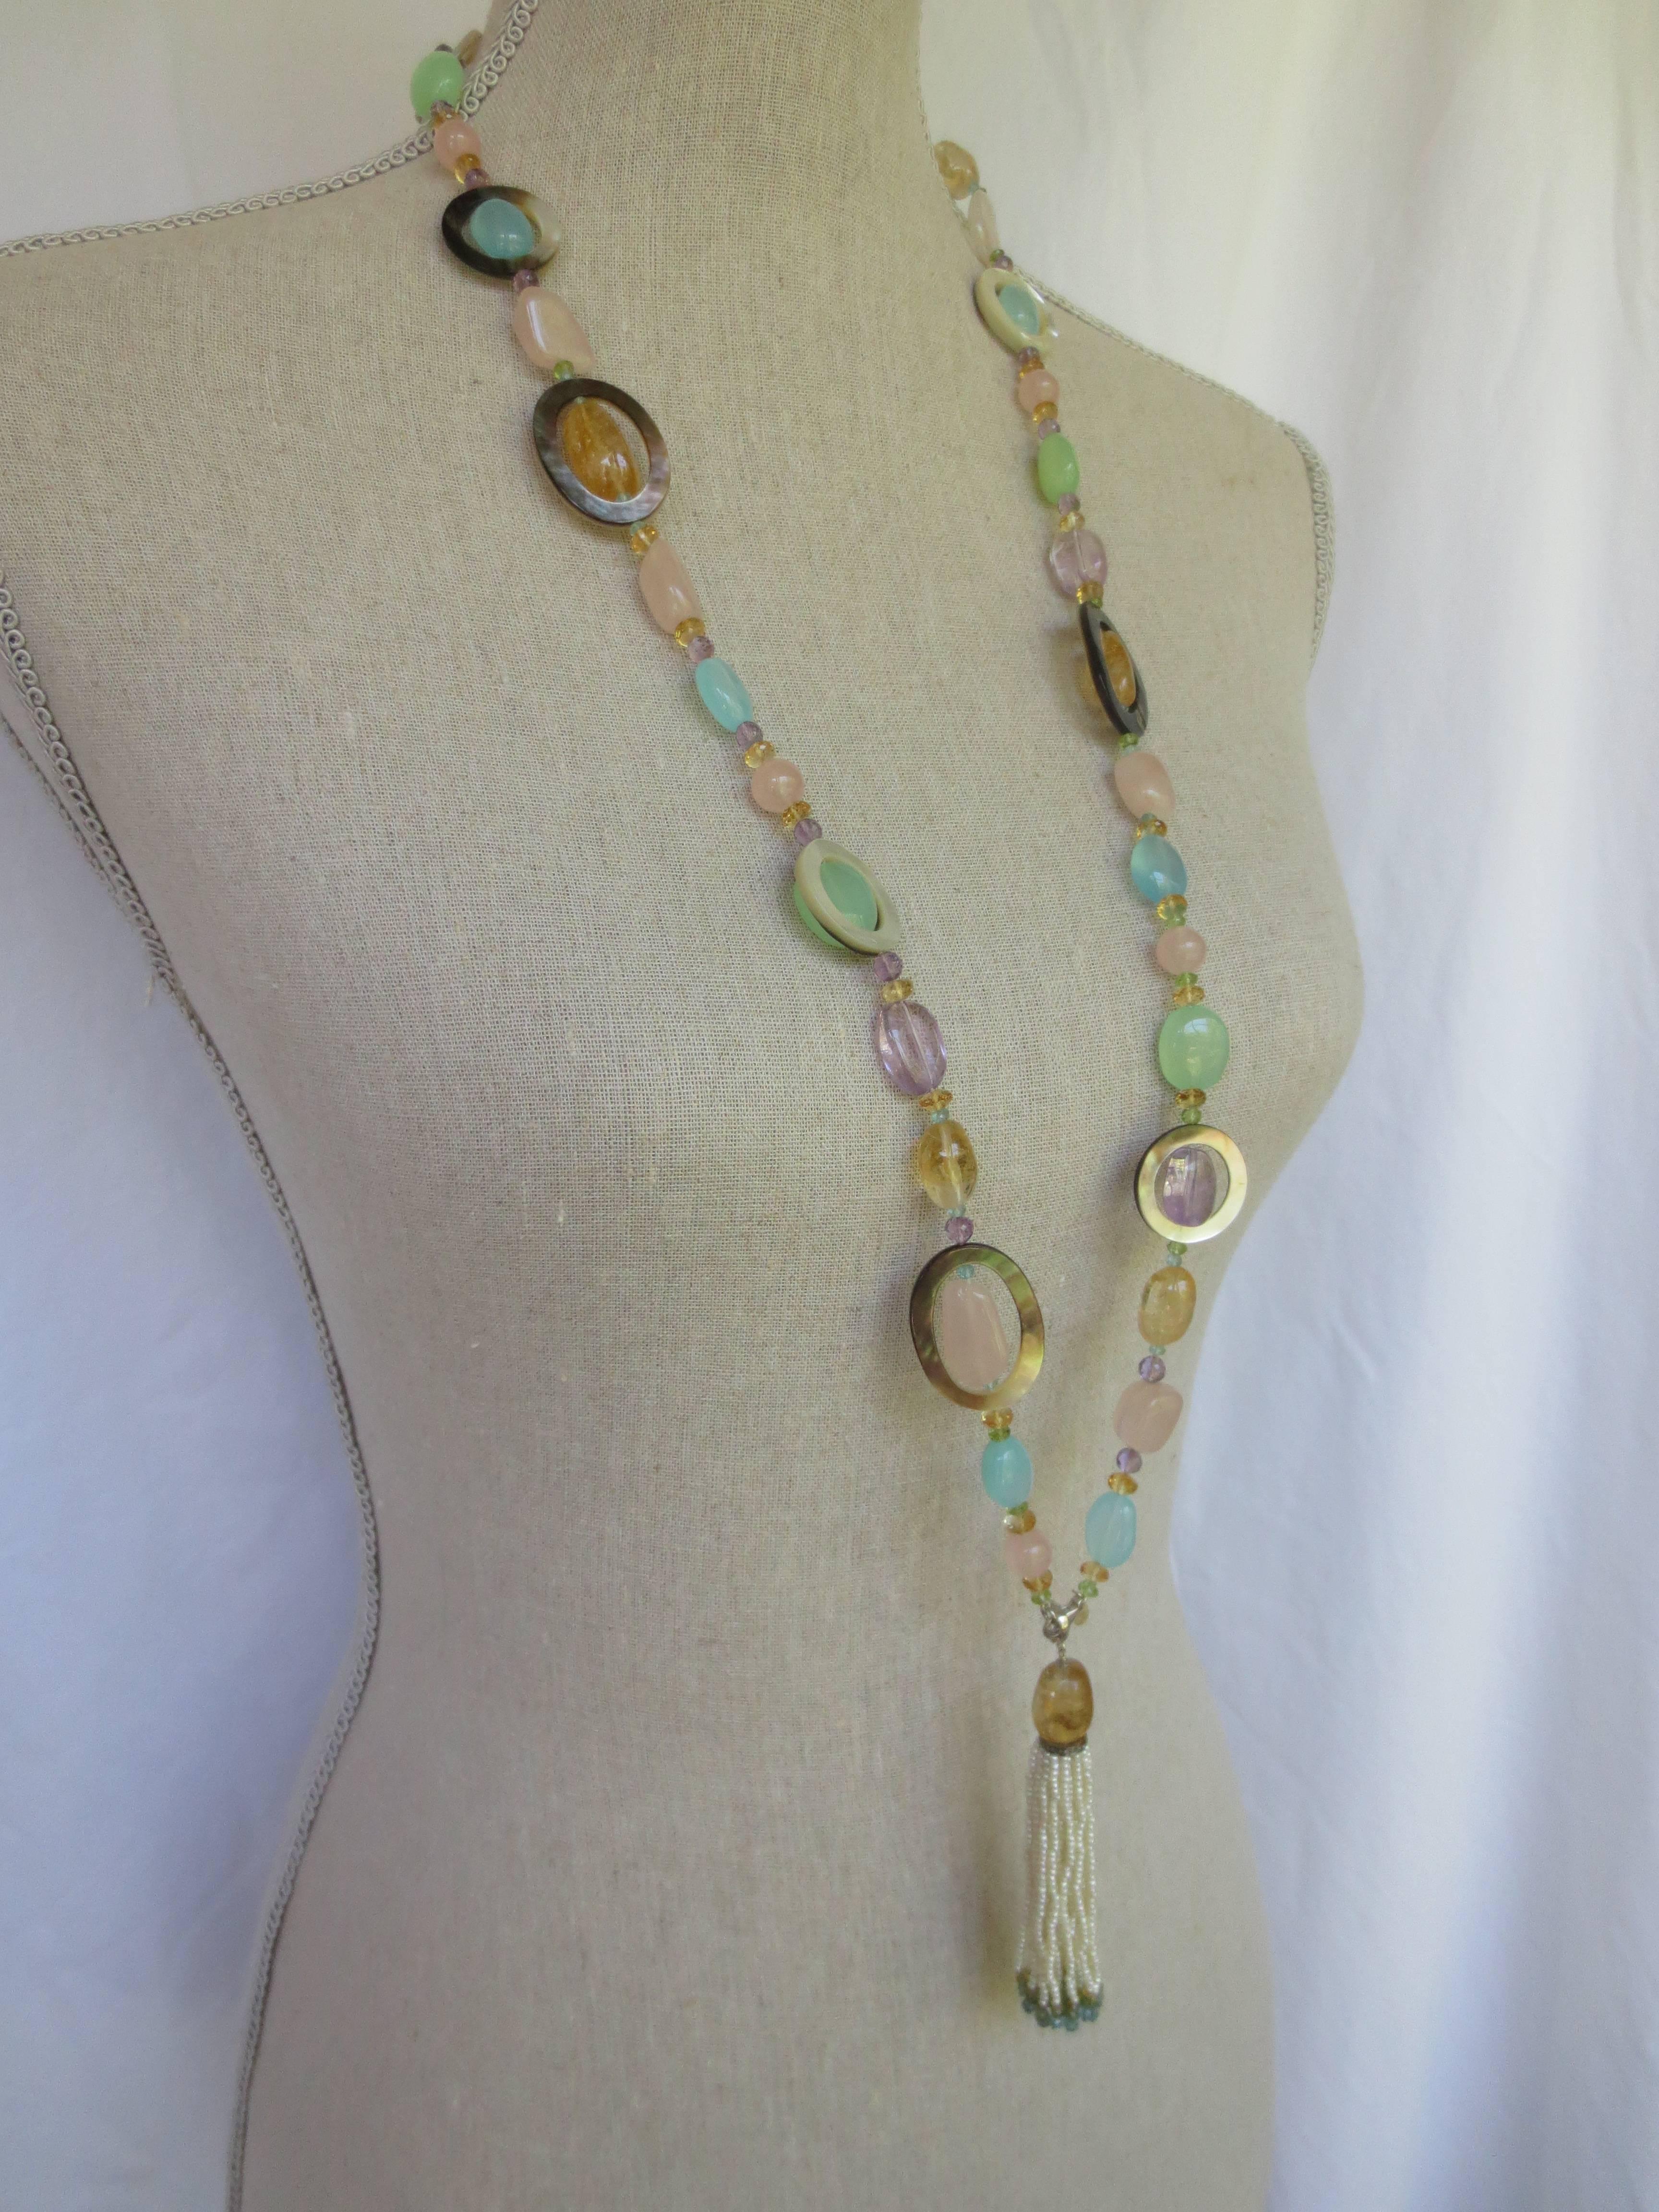 Multi color semi-precious stones Citrine, Pink quartz, Blue and Green Apatite, Amethyst, Peridot, Florite, London Blue Topaz, and Mother-of-Pearl are combined to create a gorgeous shimmering piece. 

Without tassel, necklace measures 38 inches